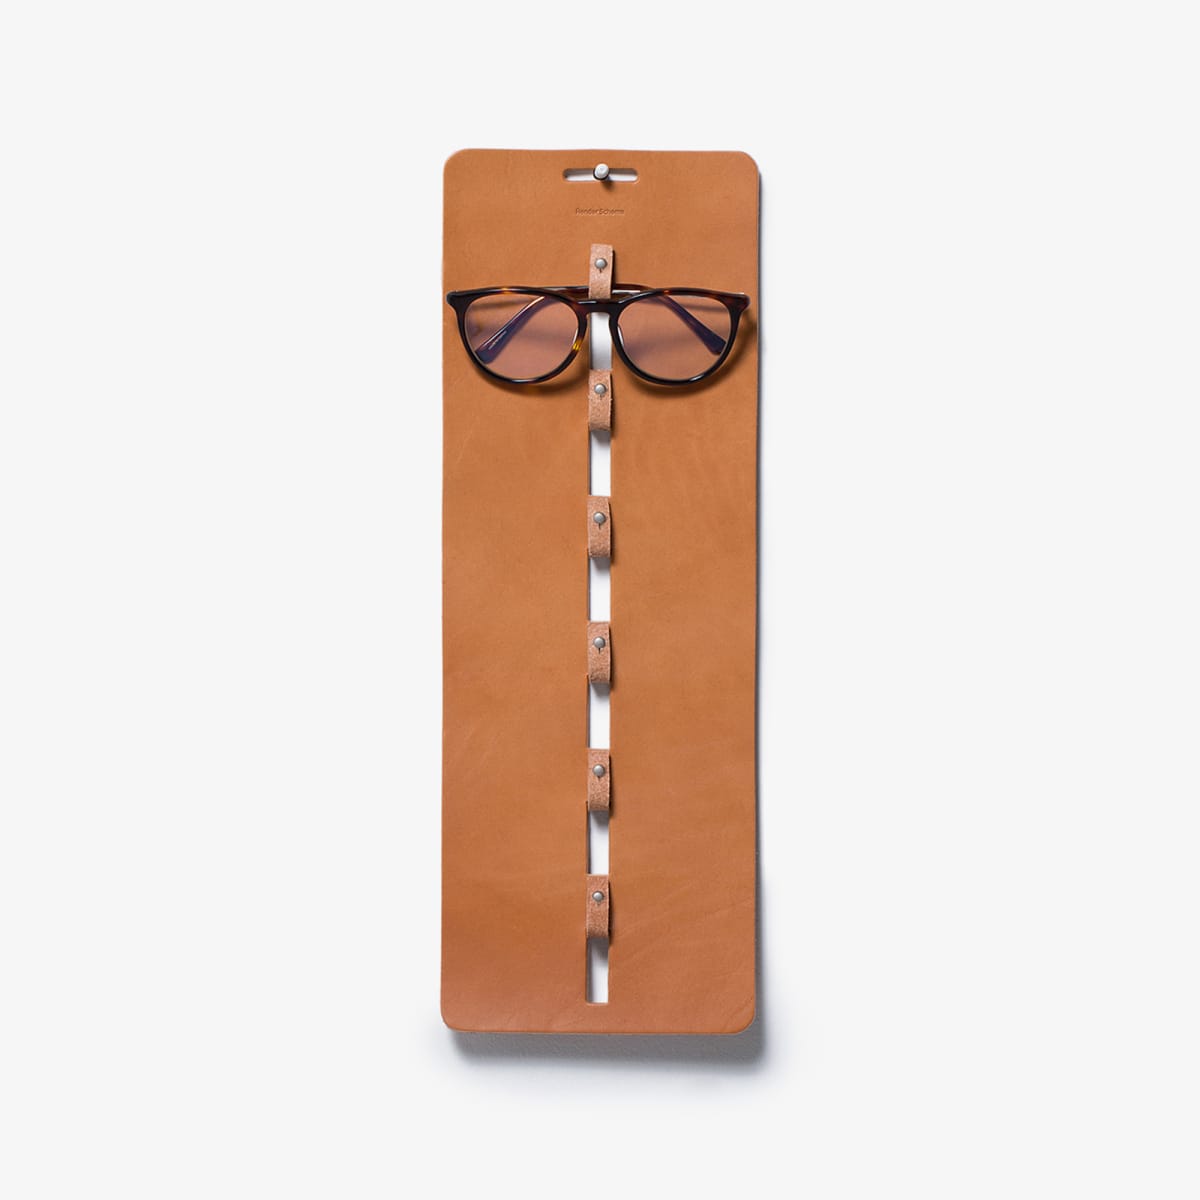 Hender Scheme's Glasses Wall Holder is a must for the eyewear